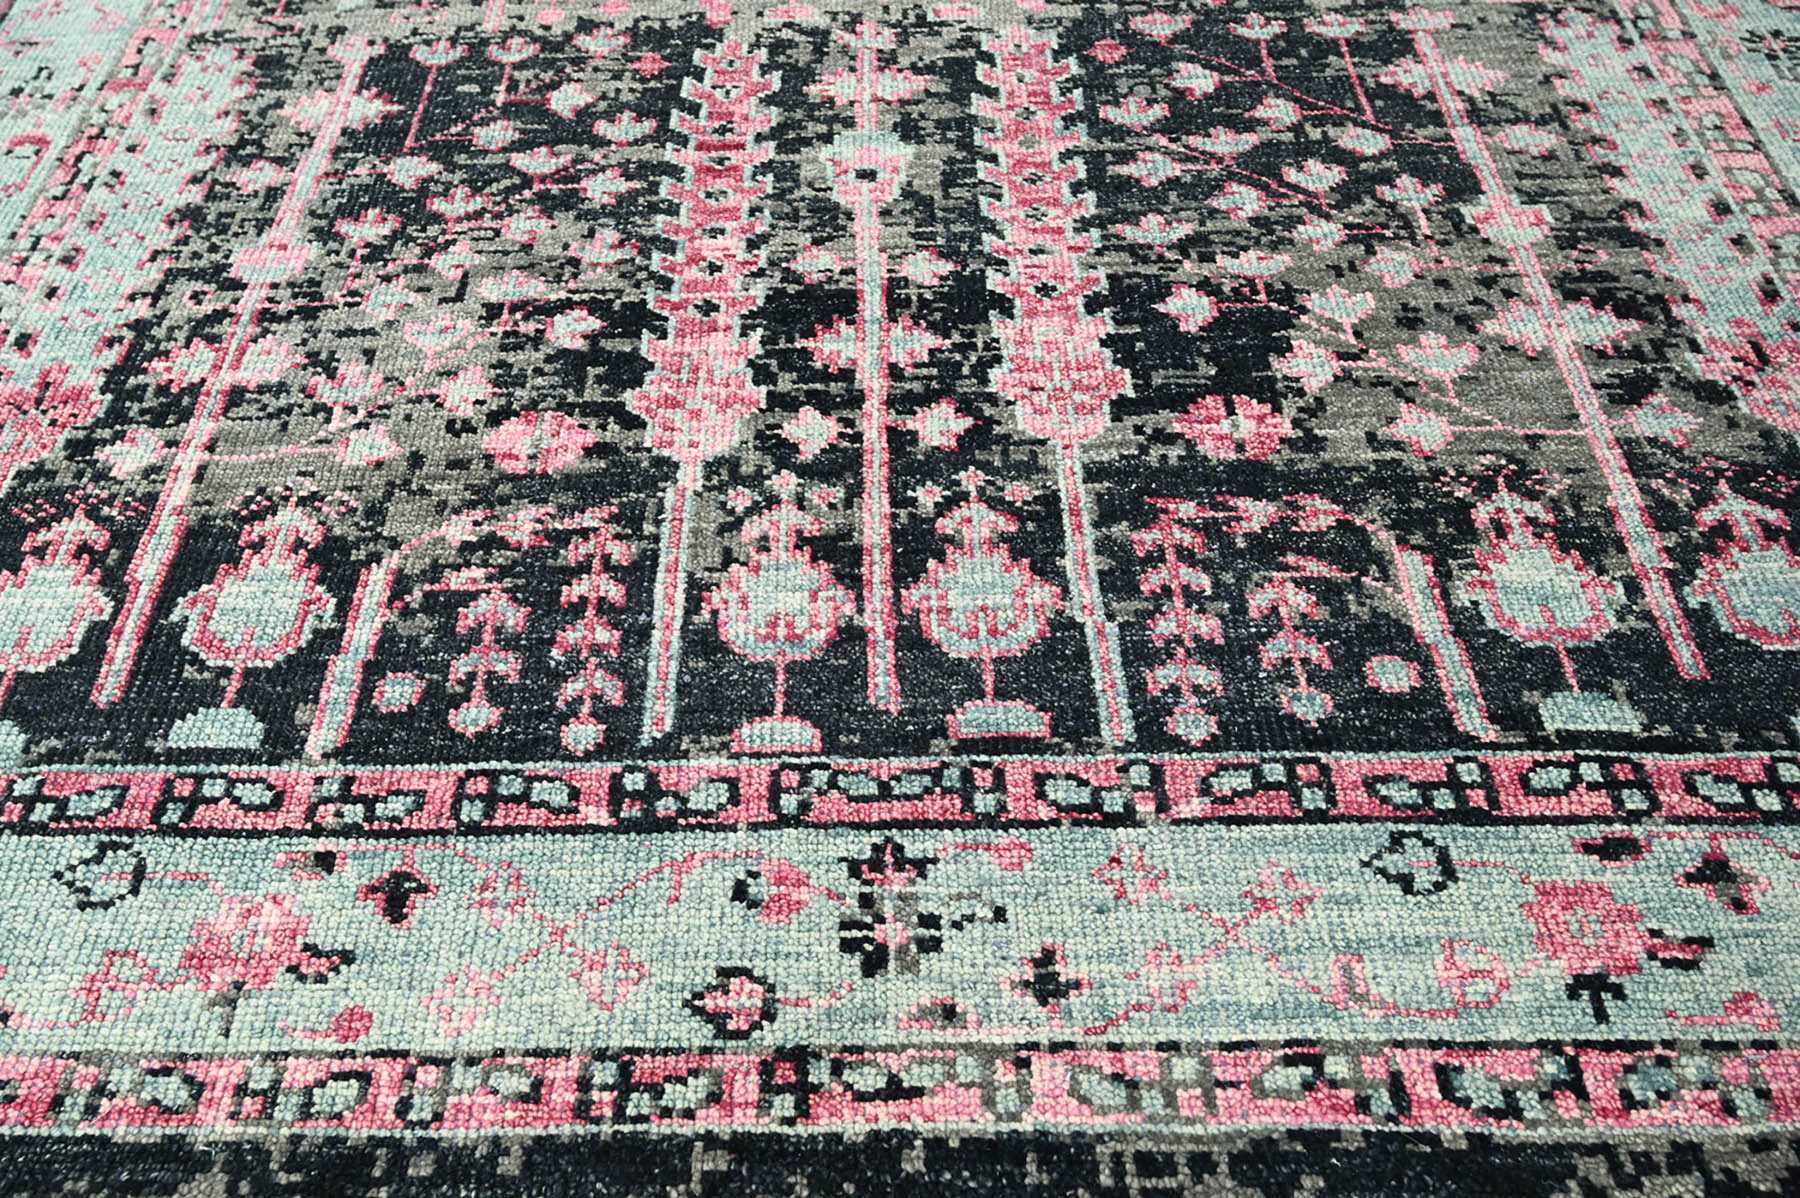 Multi Size Black, Gray Hand Knotted Arts & Crafts 100% Wool Turkish Oushak Traditional Oriental Area Rug